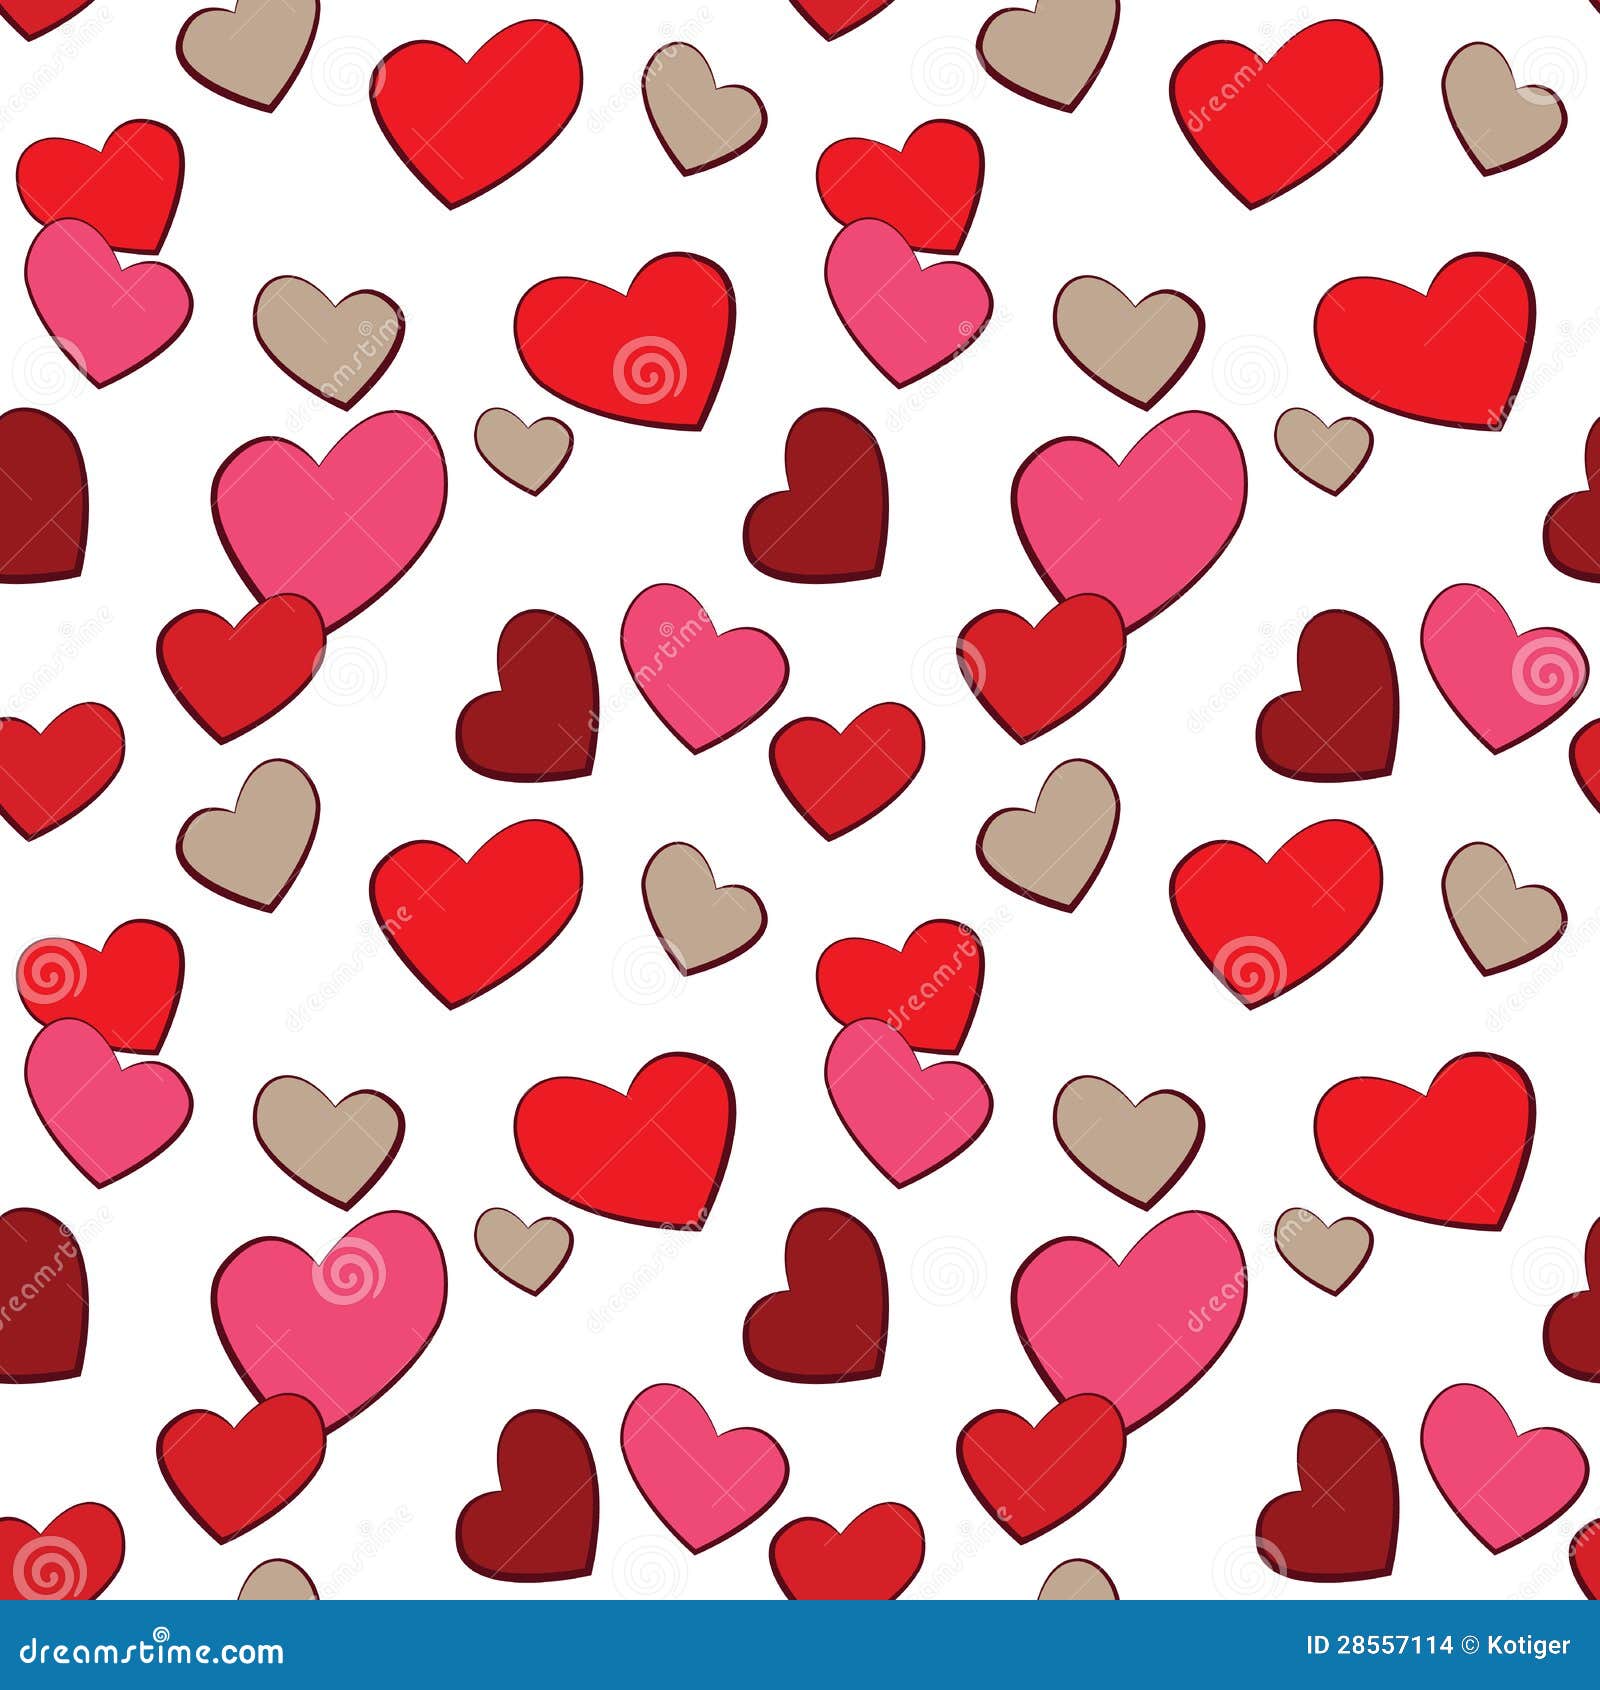 More similar stock images of ` Valentines Day Hearts Love pattern `